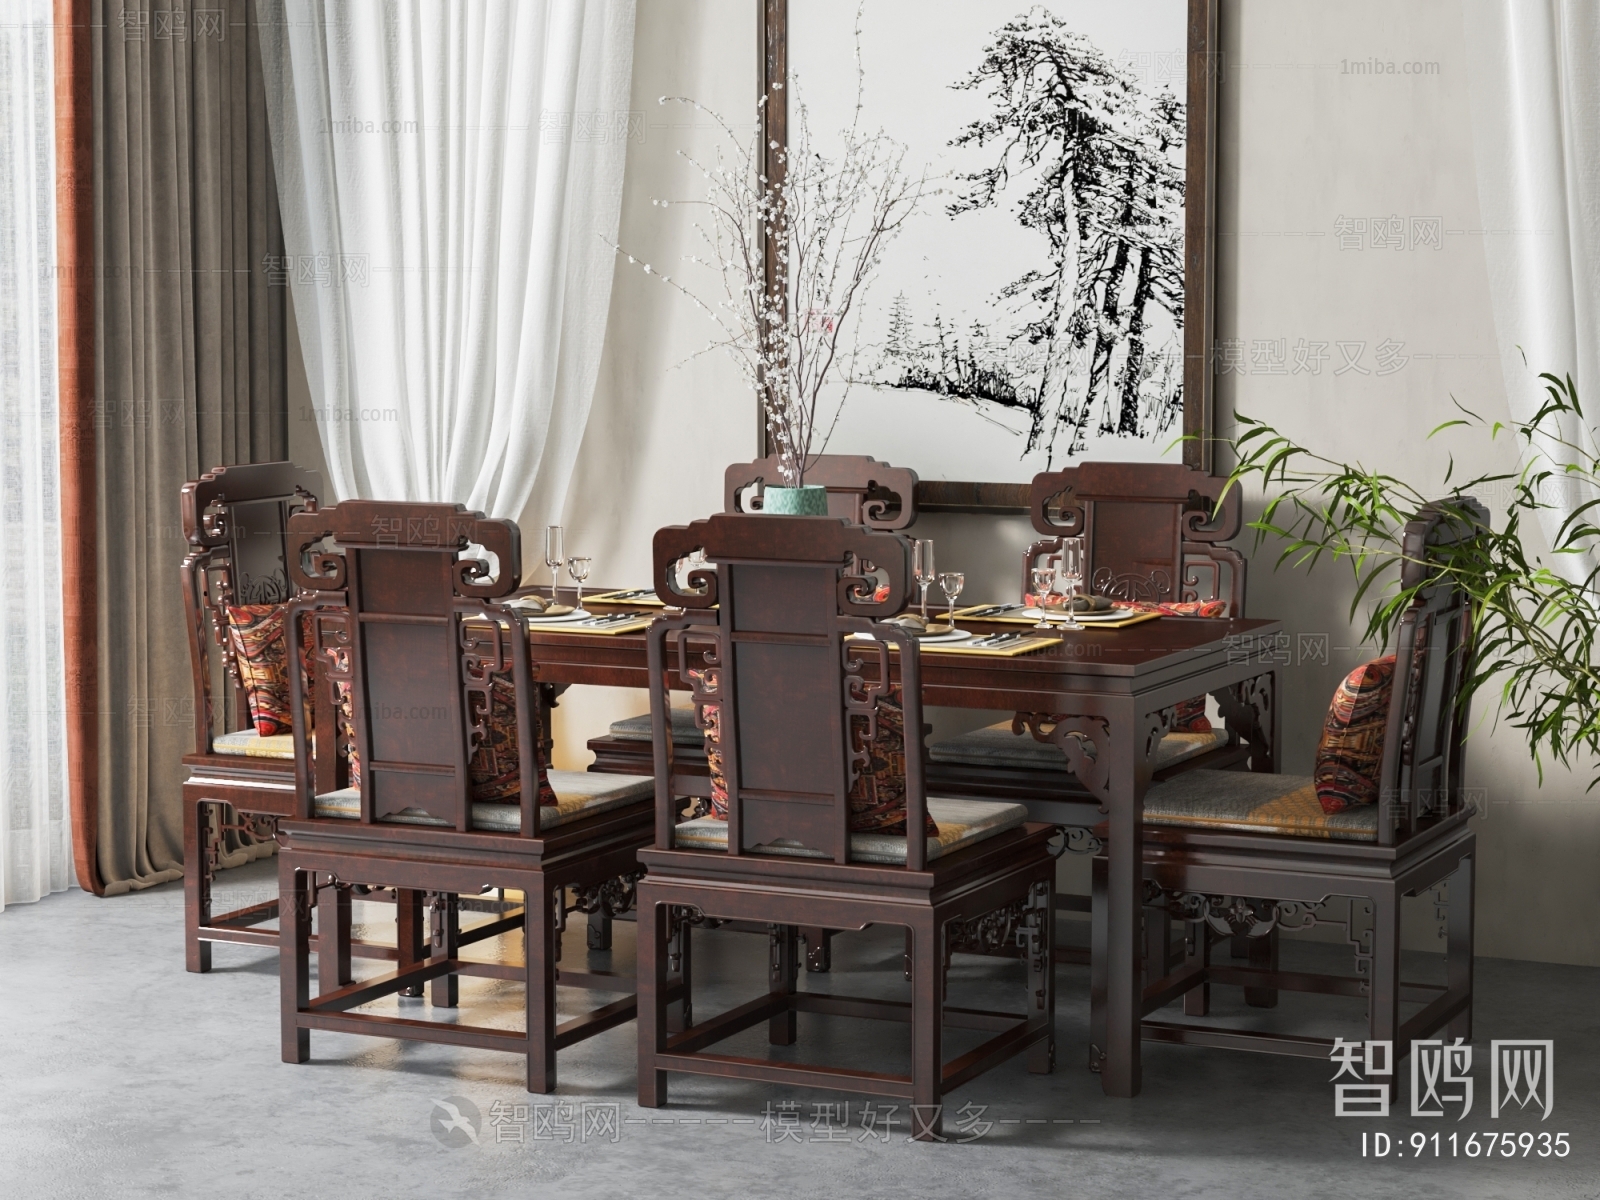 Chinese Style Dining Table And Chairs